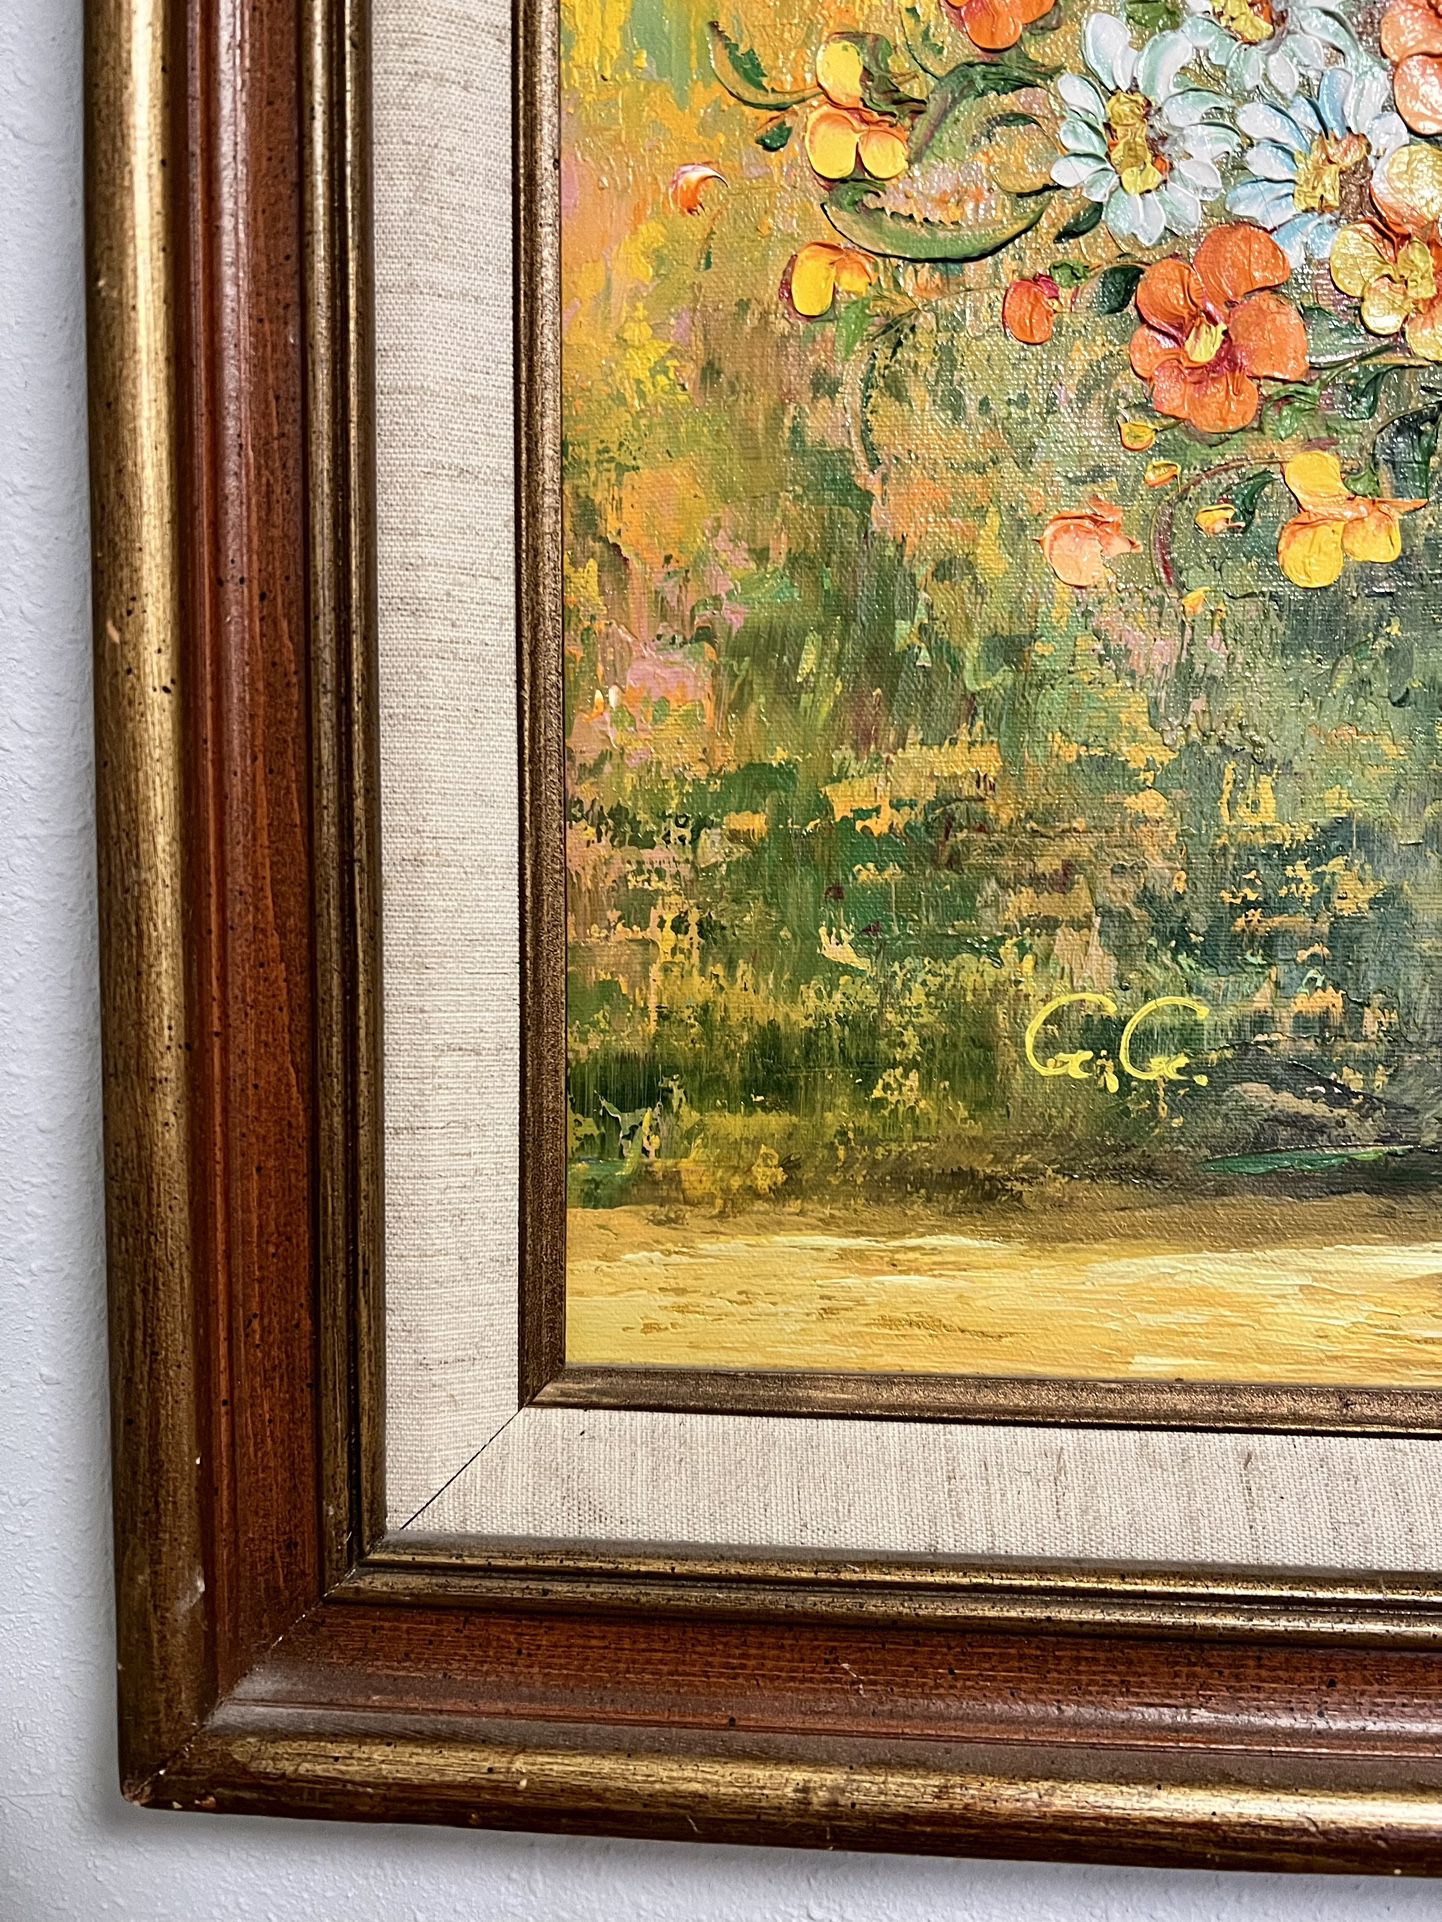 Large Vintage Floral Acrylic Painting. Framed Canvas Painting. Warm Colors MCM Mid Century Decor